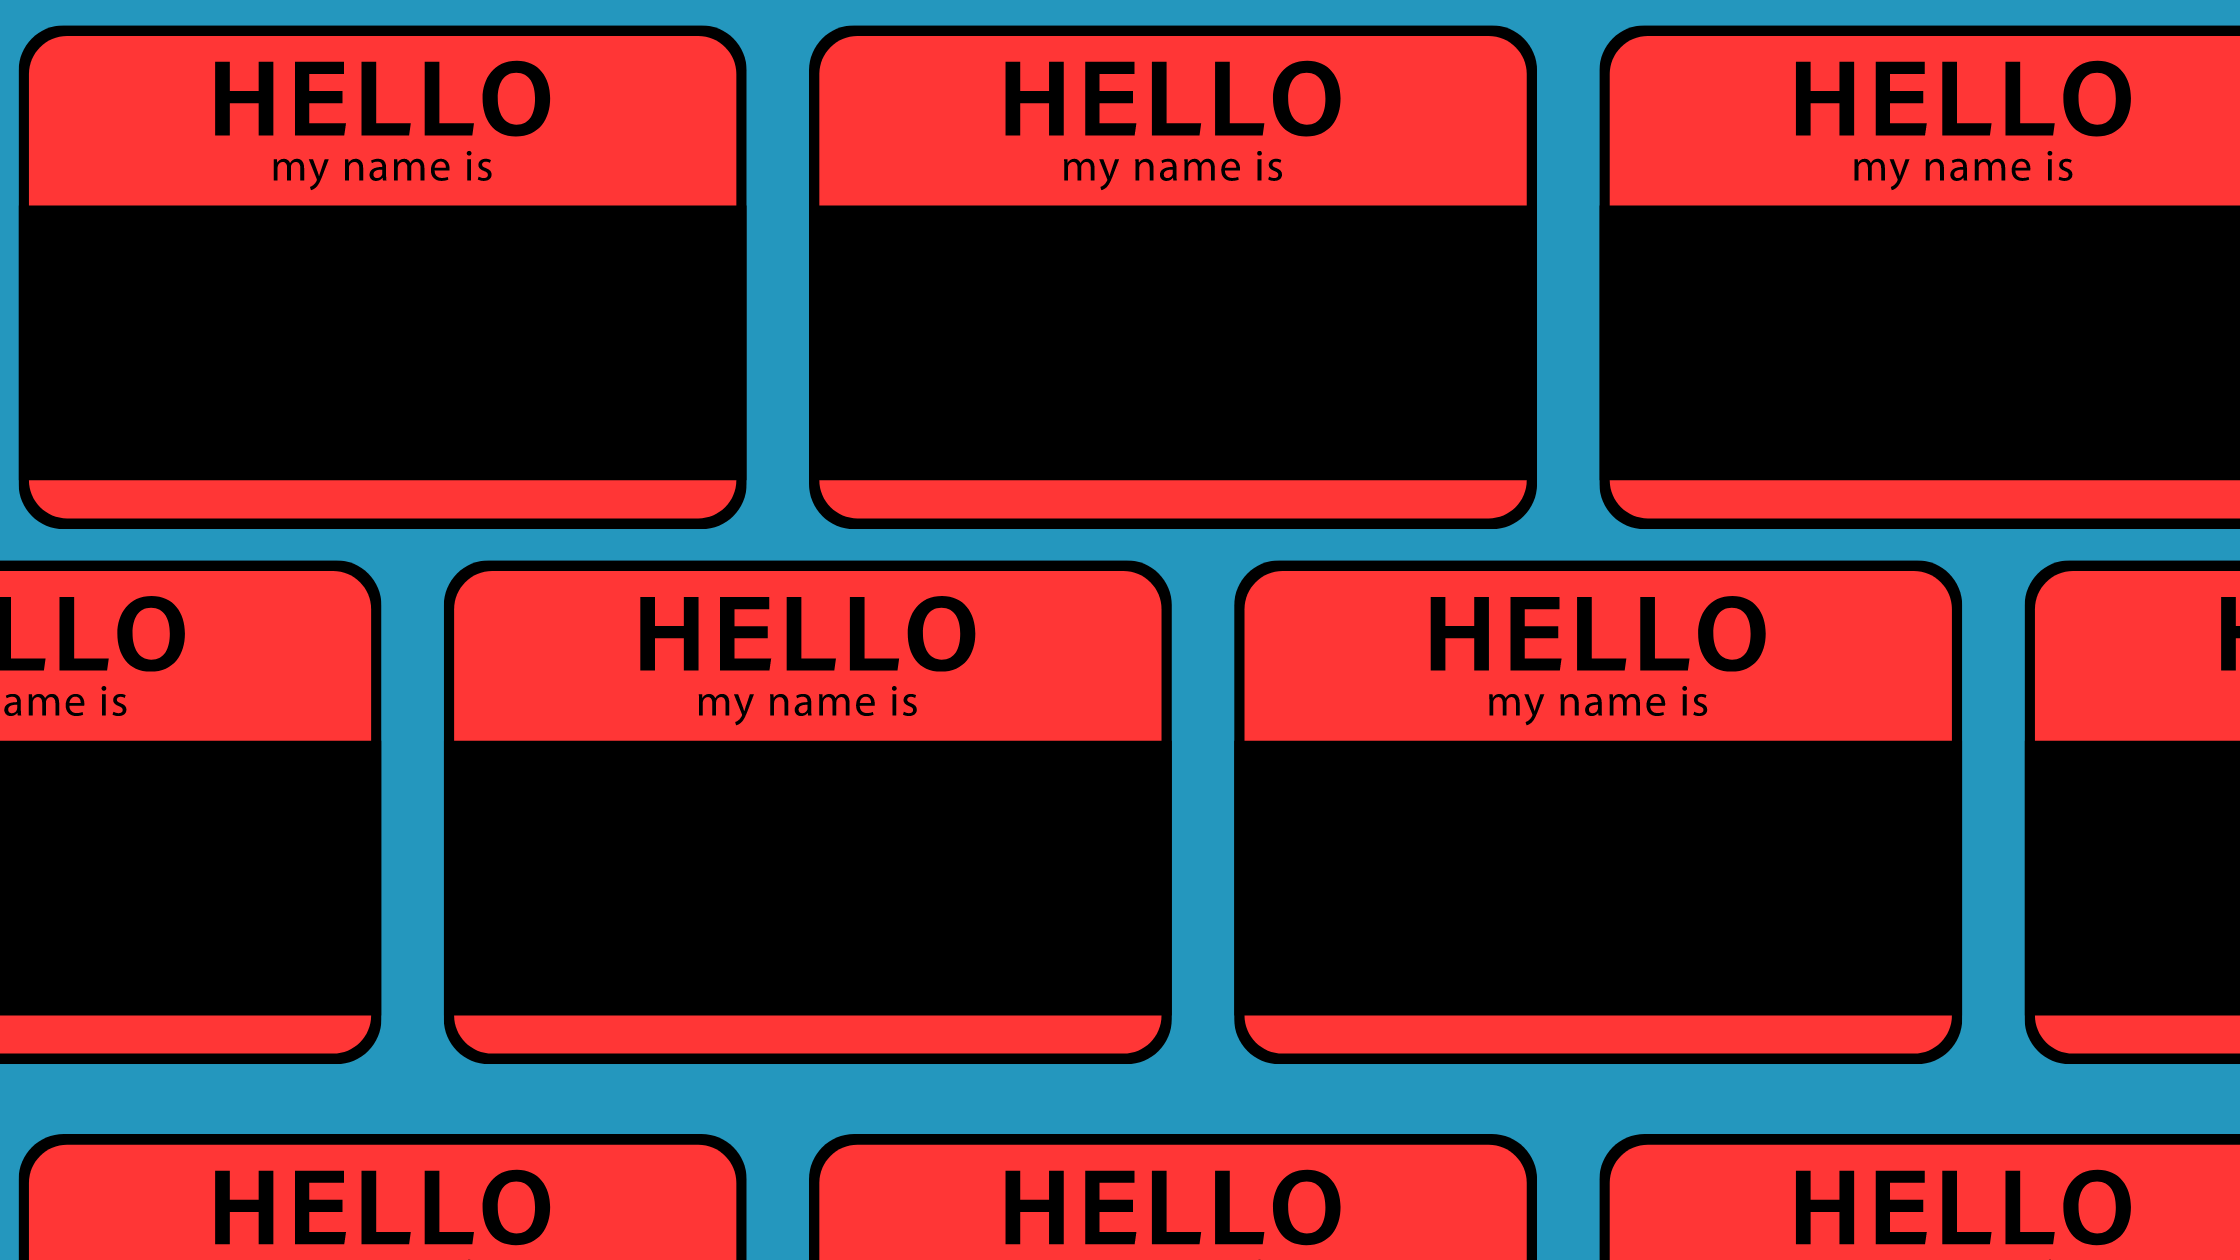 A repeating pattern of "Hello my name is" name tags